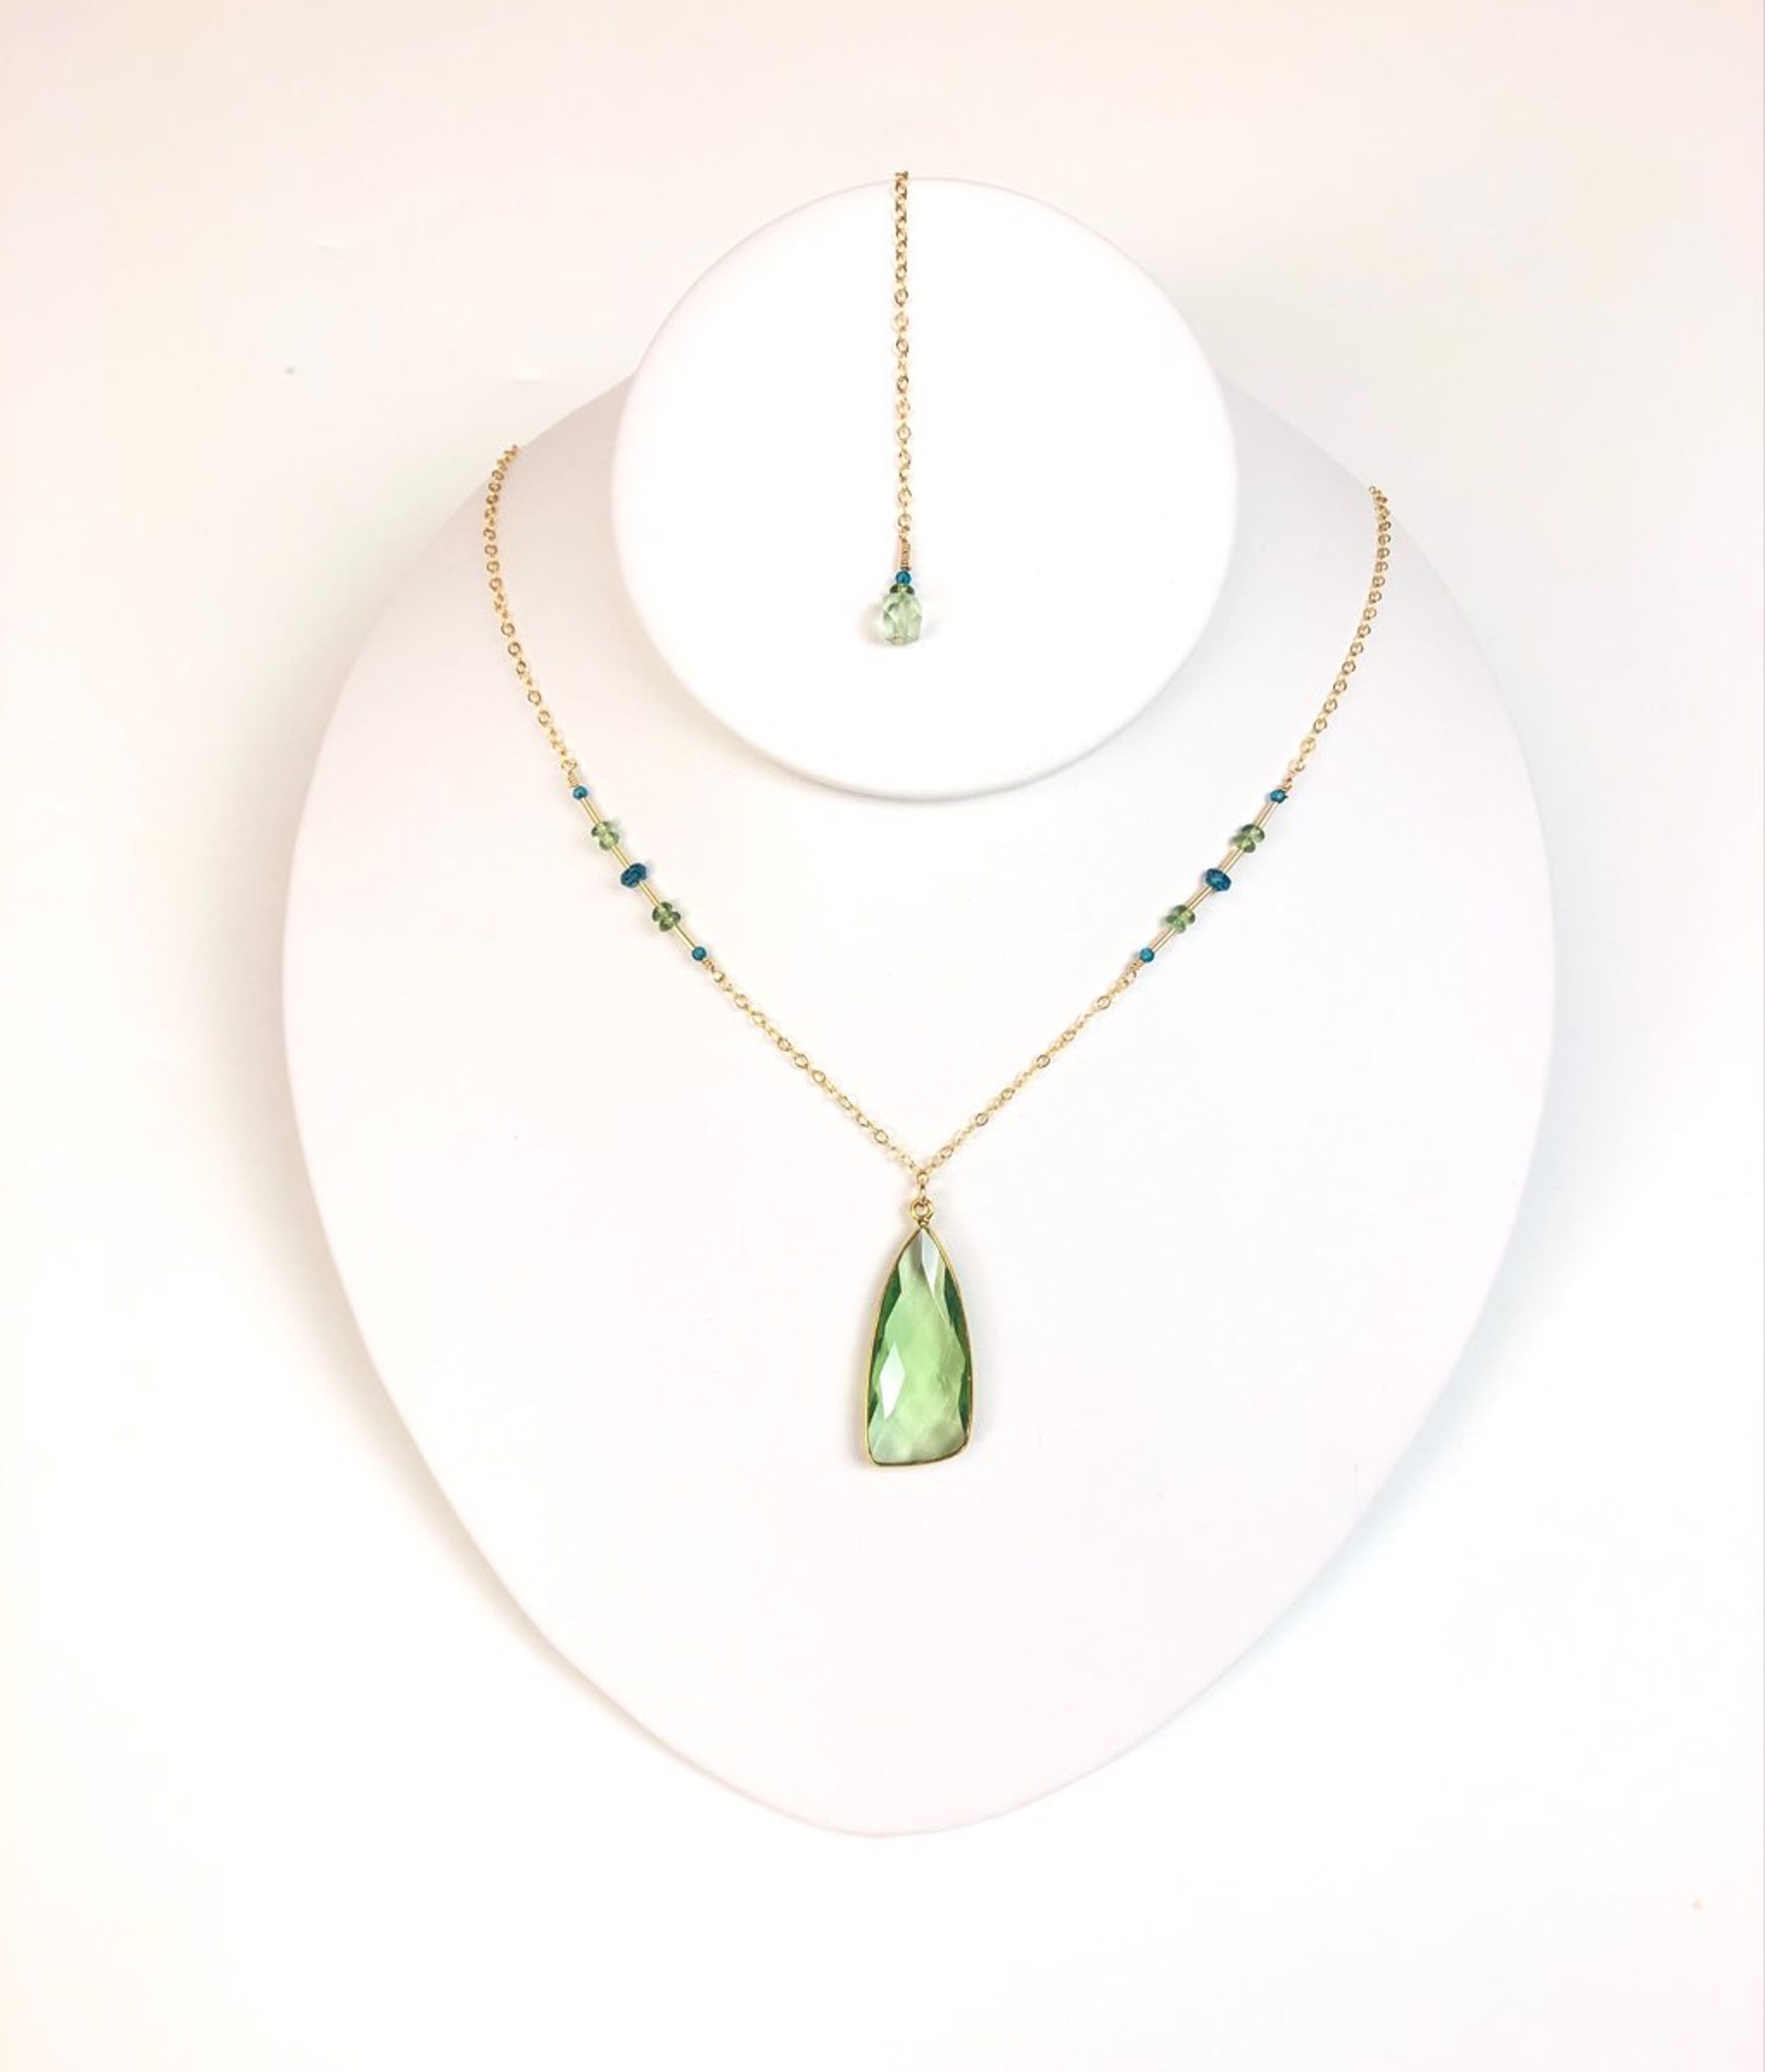 Green Amethyst, London Blue Quartz, Green Apatite, and 14K Gold Chain Necklace Infinity Pendant Set by Lisa Kelley